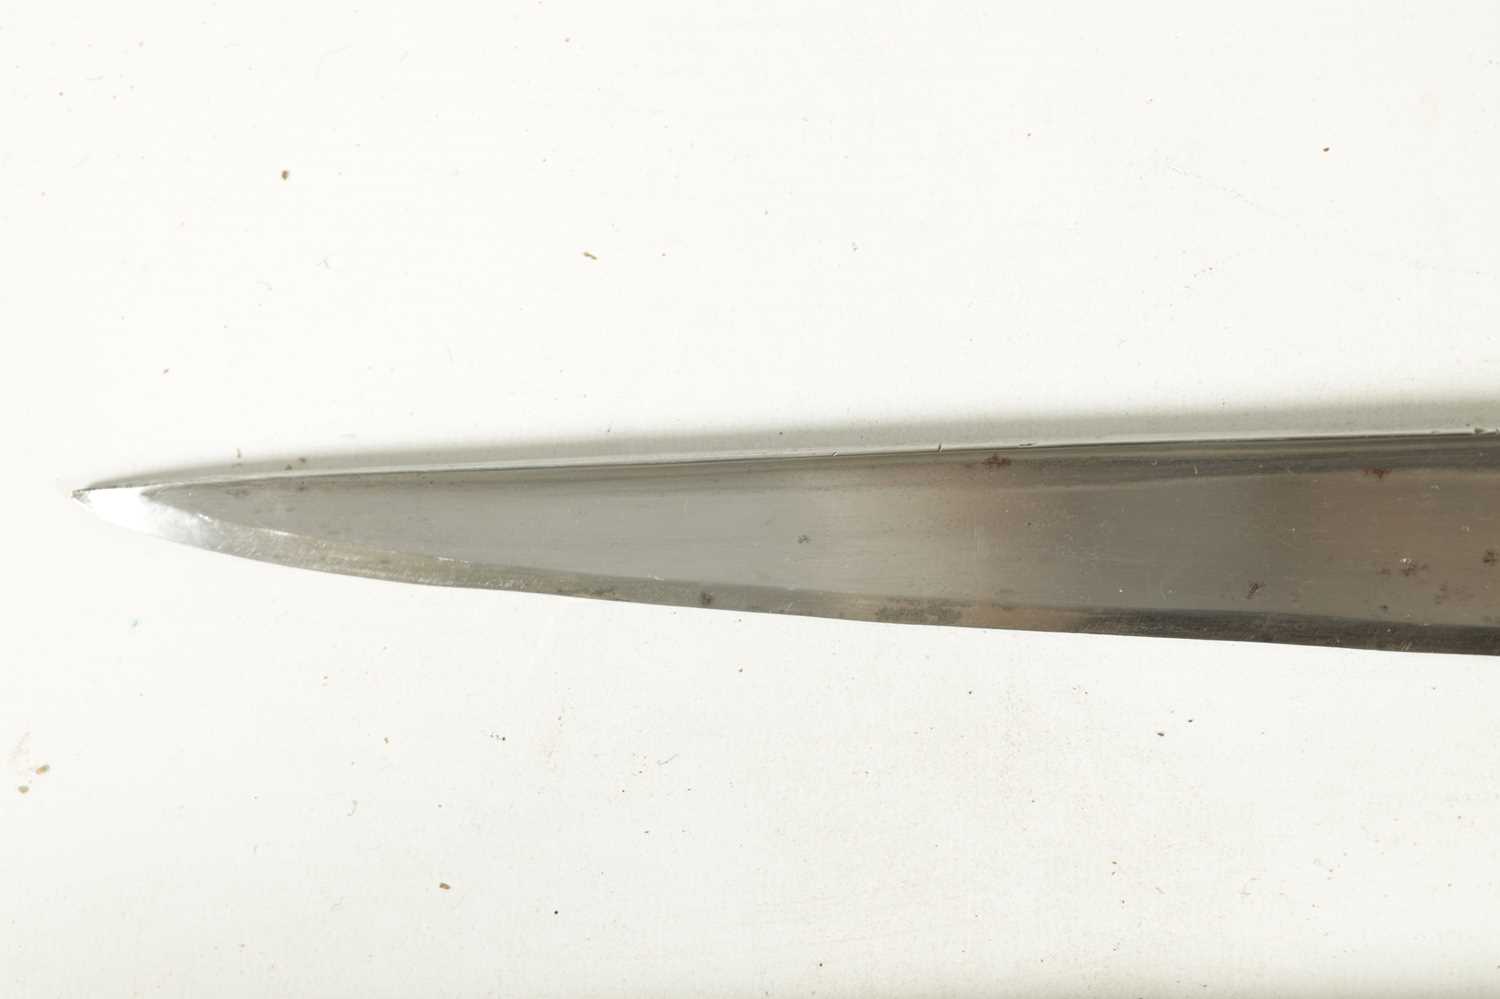 A 19TH CENTURY INDIAN KHYBER KNIFE - Image 7 of 10